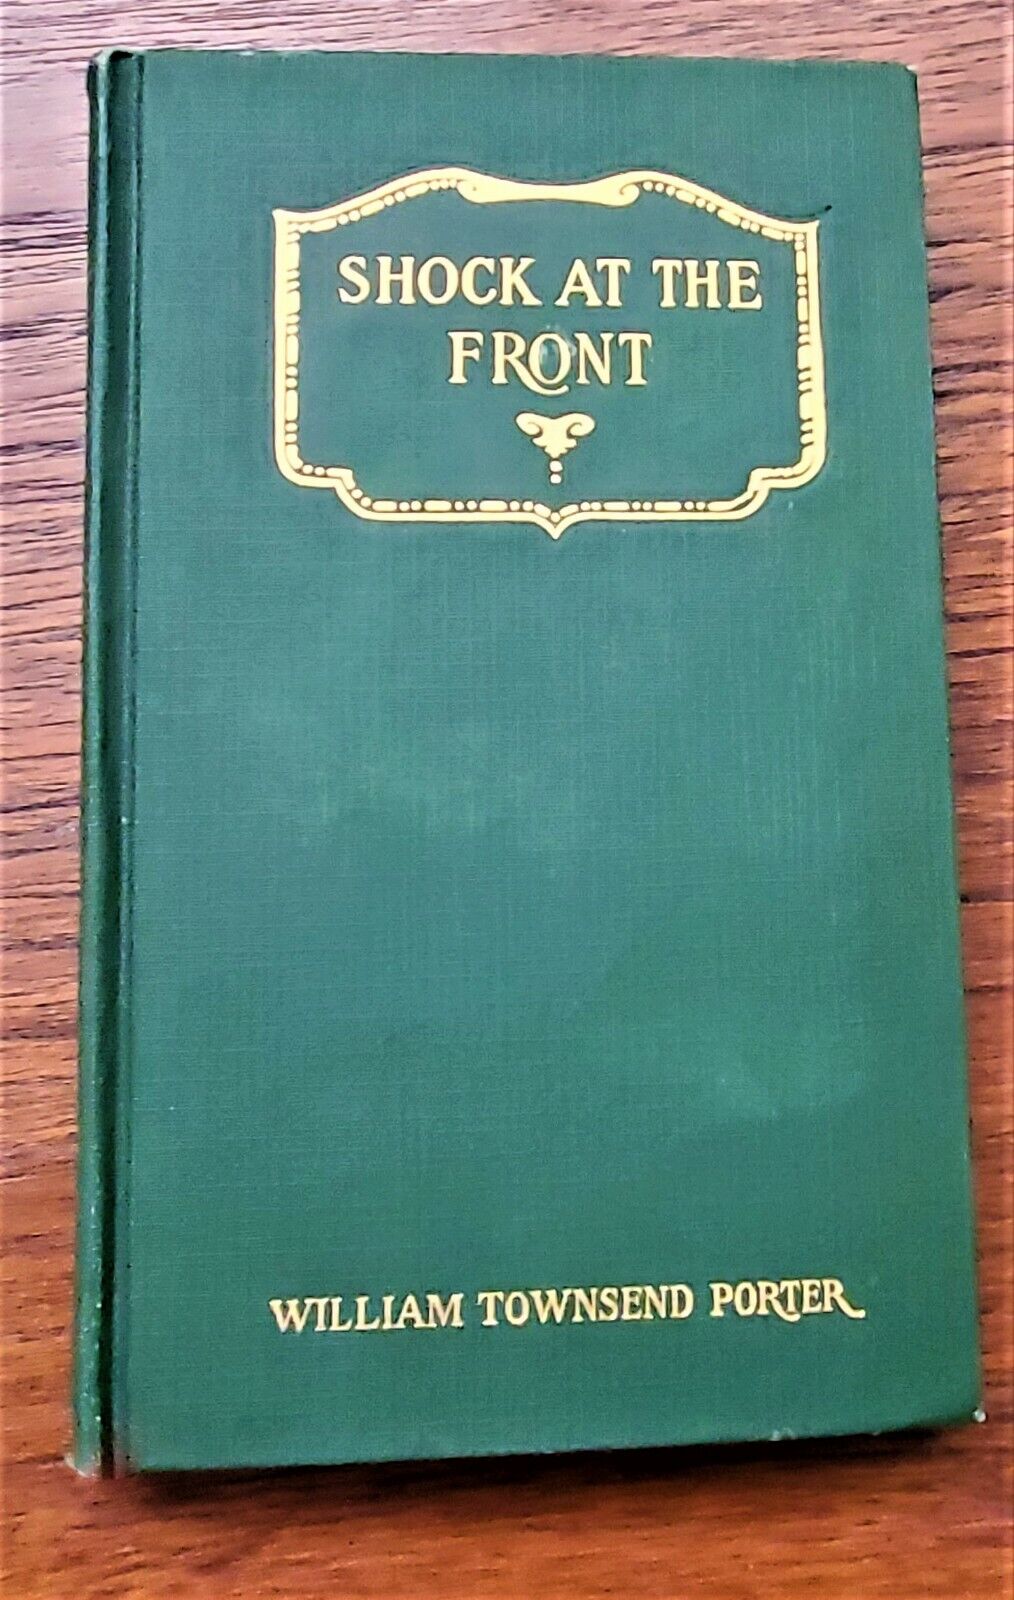 WW1 US med/military SHOCK AT THE FRONT by William Townsend Porter (1918) 151 p.